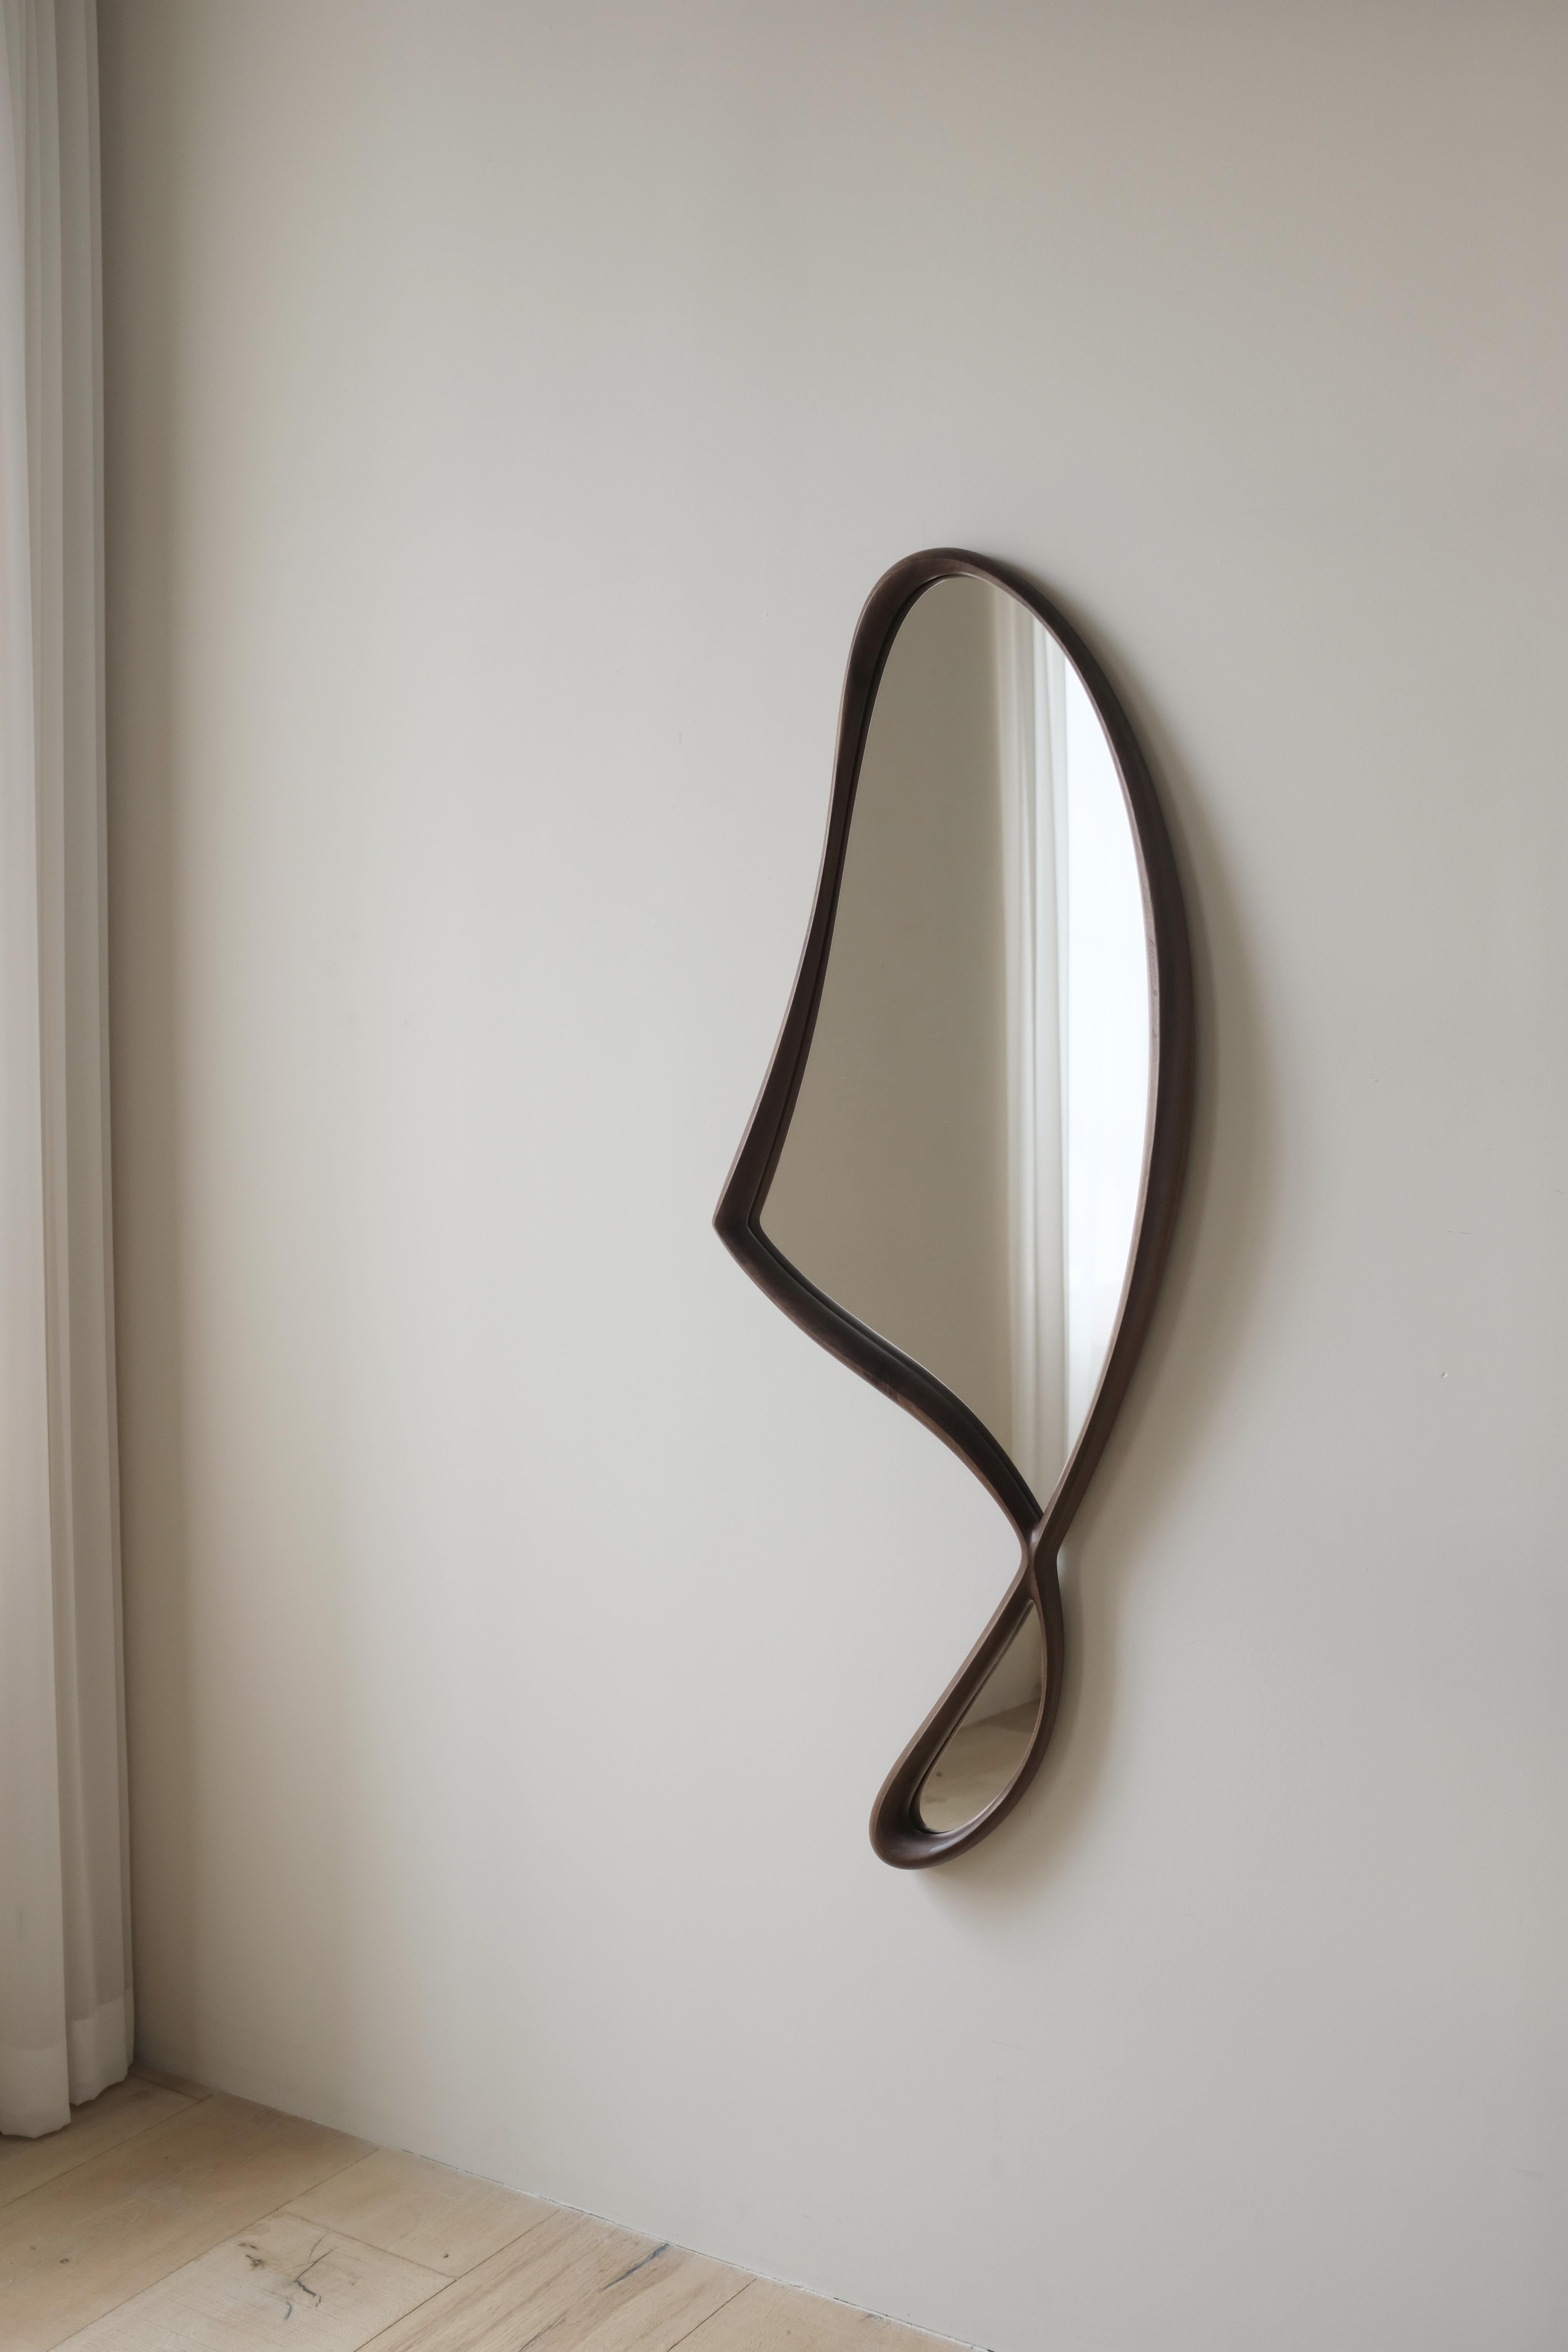 'Momentum Mirror II' by Soo Joo is a statement wooden wall mirror with a unique and timeless asymmetric form. This version of the mirror is in a cool Walnut Wood and a slightly smaller size than the bronze mirror. 

Momentum Mirror is a full-body